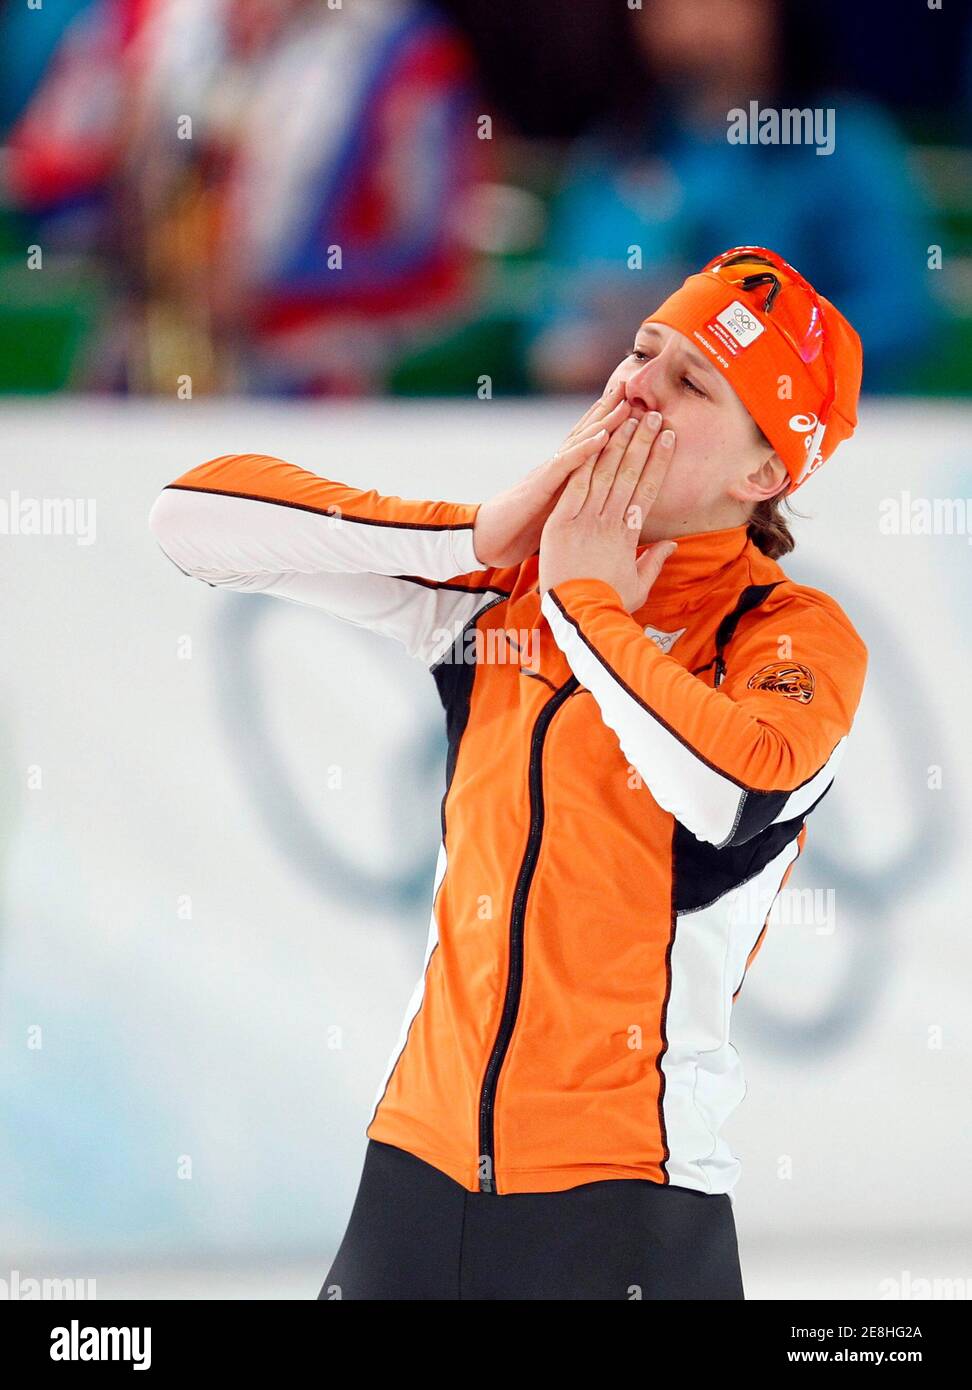 Gold medallist Ireen Wust of the Netherlands reacts after the women's 1500 metres at the Richmond Olympic Oval during the Vancouver 2010 Winter Olympics February 21, 2010.     REUTERS/Jerry Lampen (CANADA) Stock Photo